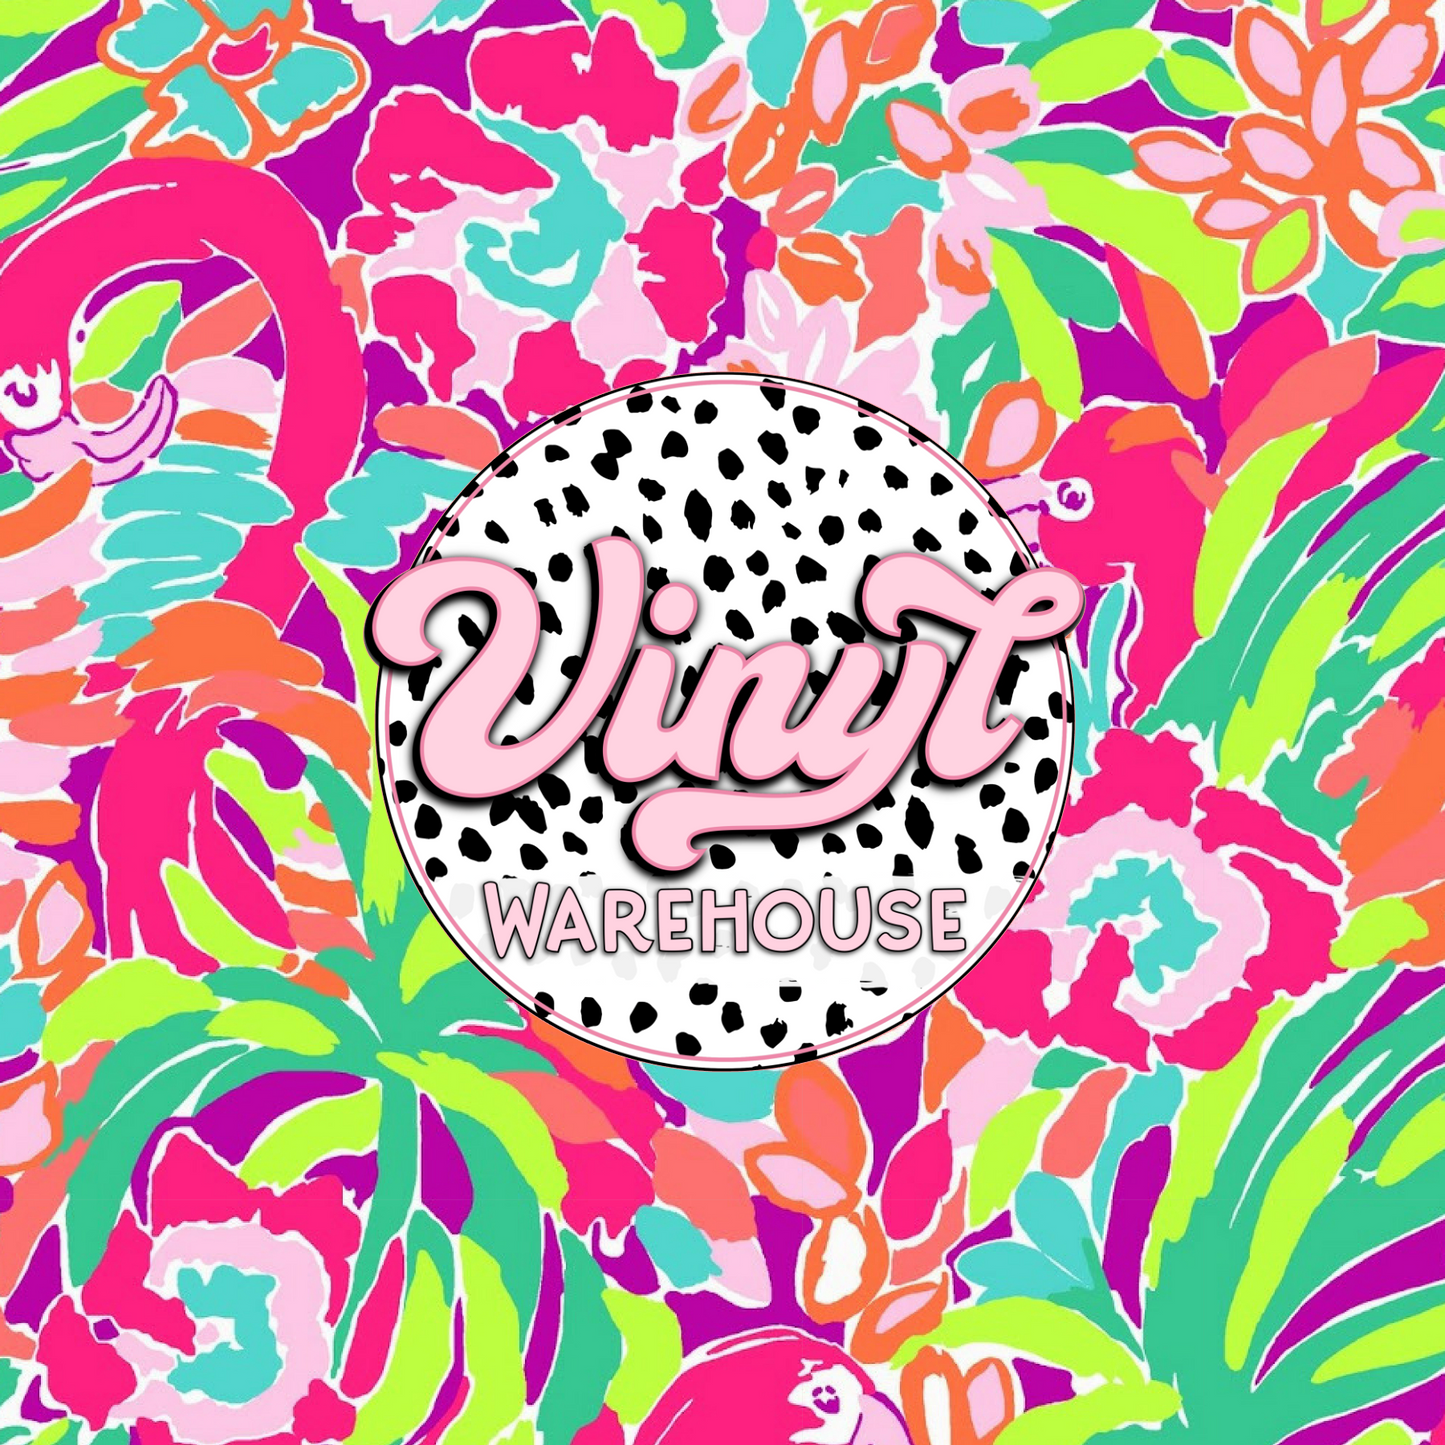 Lilly Inspired - Printed Adhesive